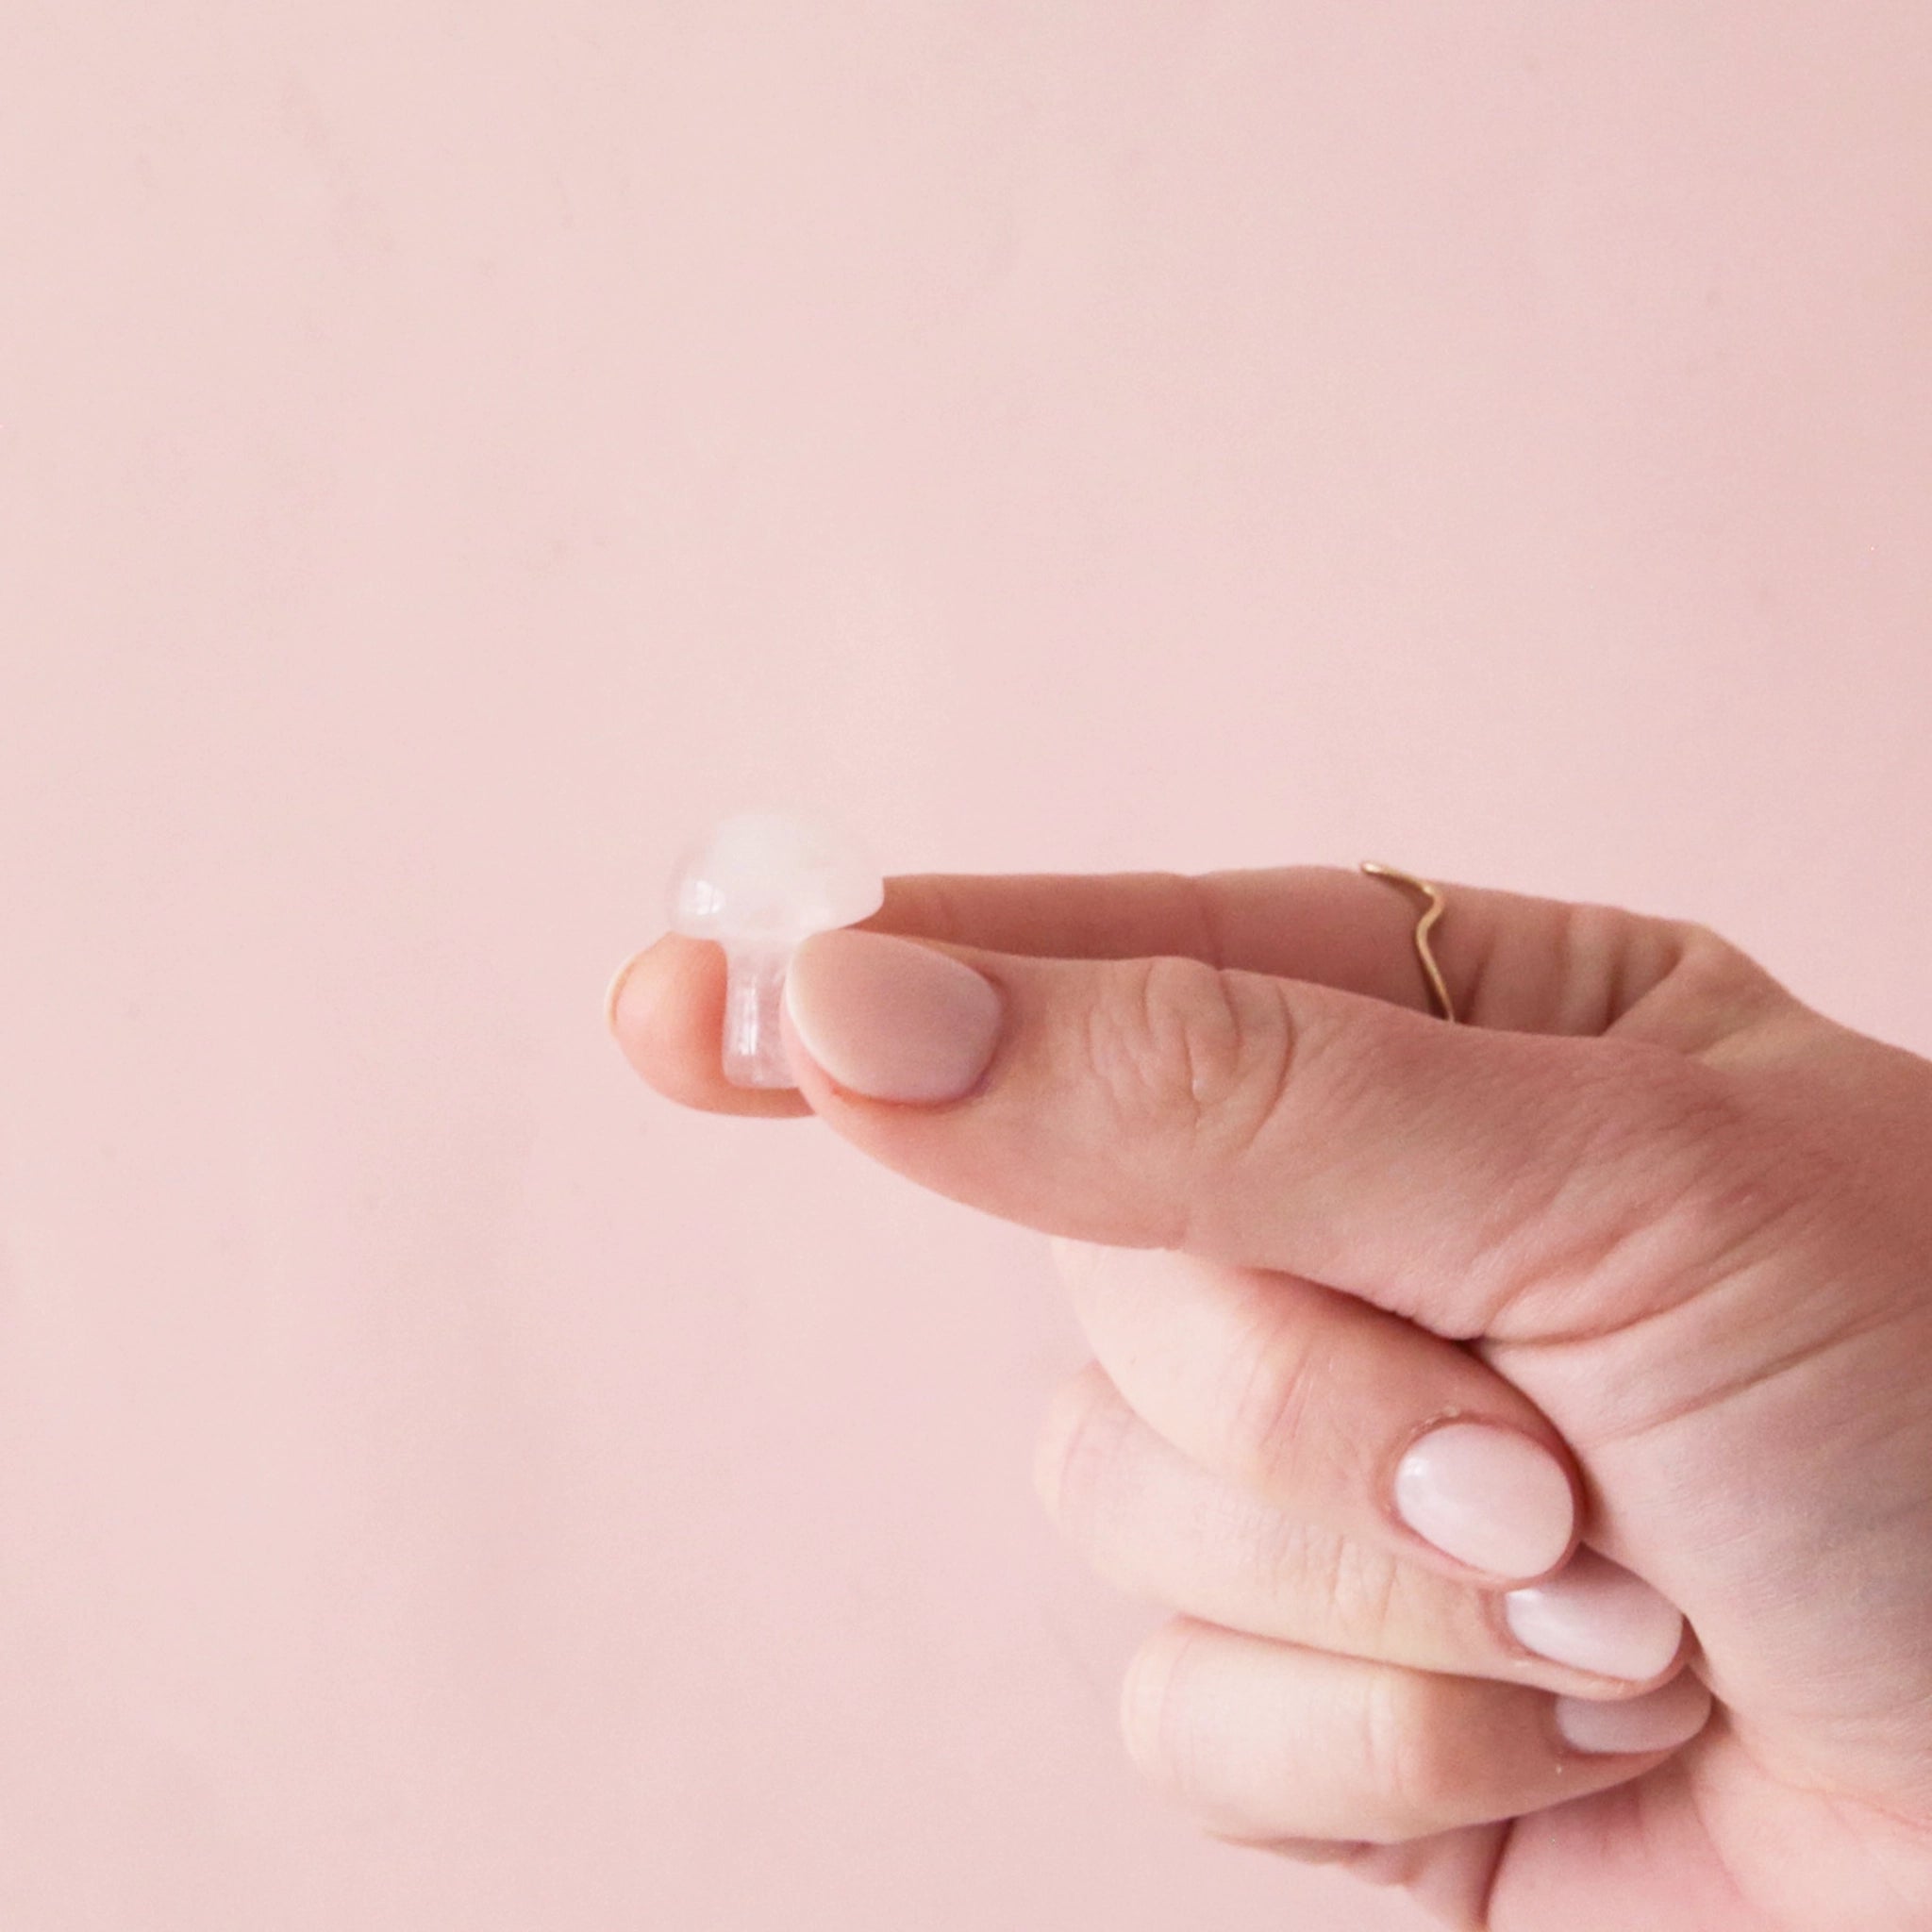 On a light pink background is a model holding a tiny rose quartz crystal in the shape of a mushroom.